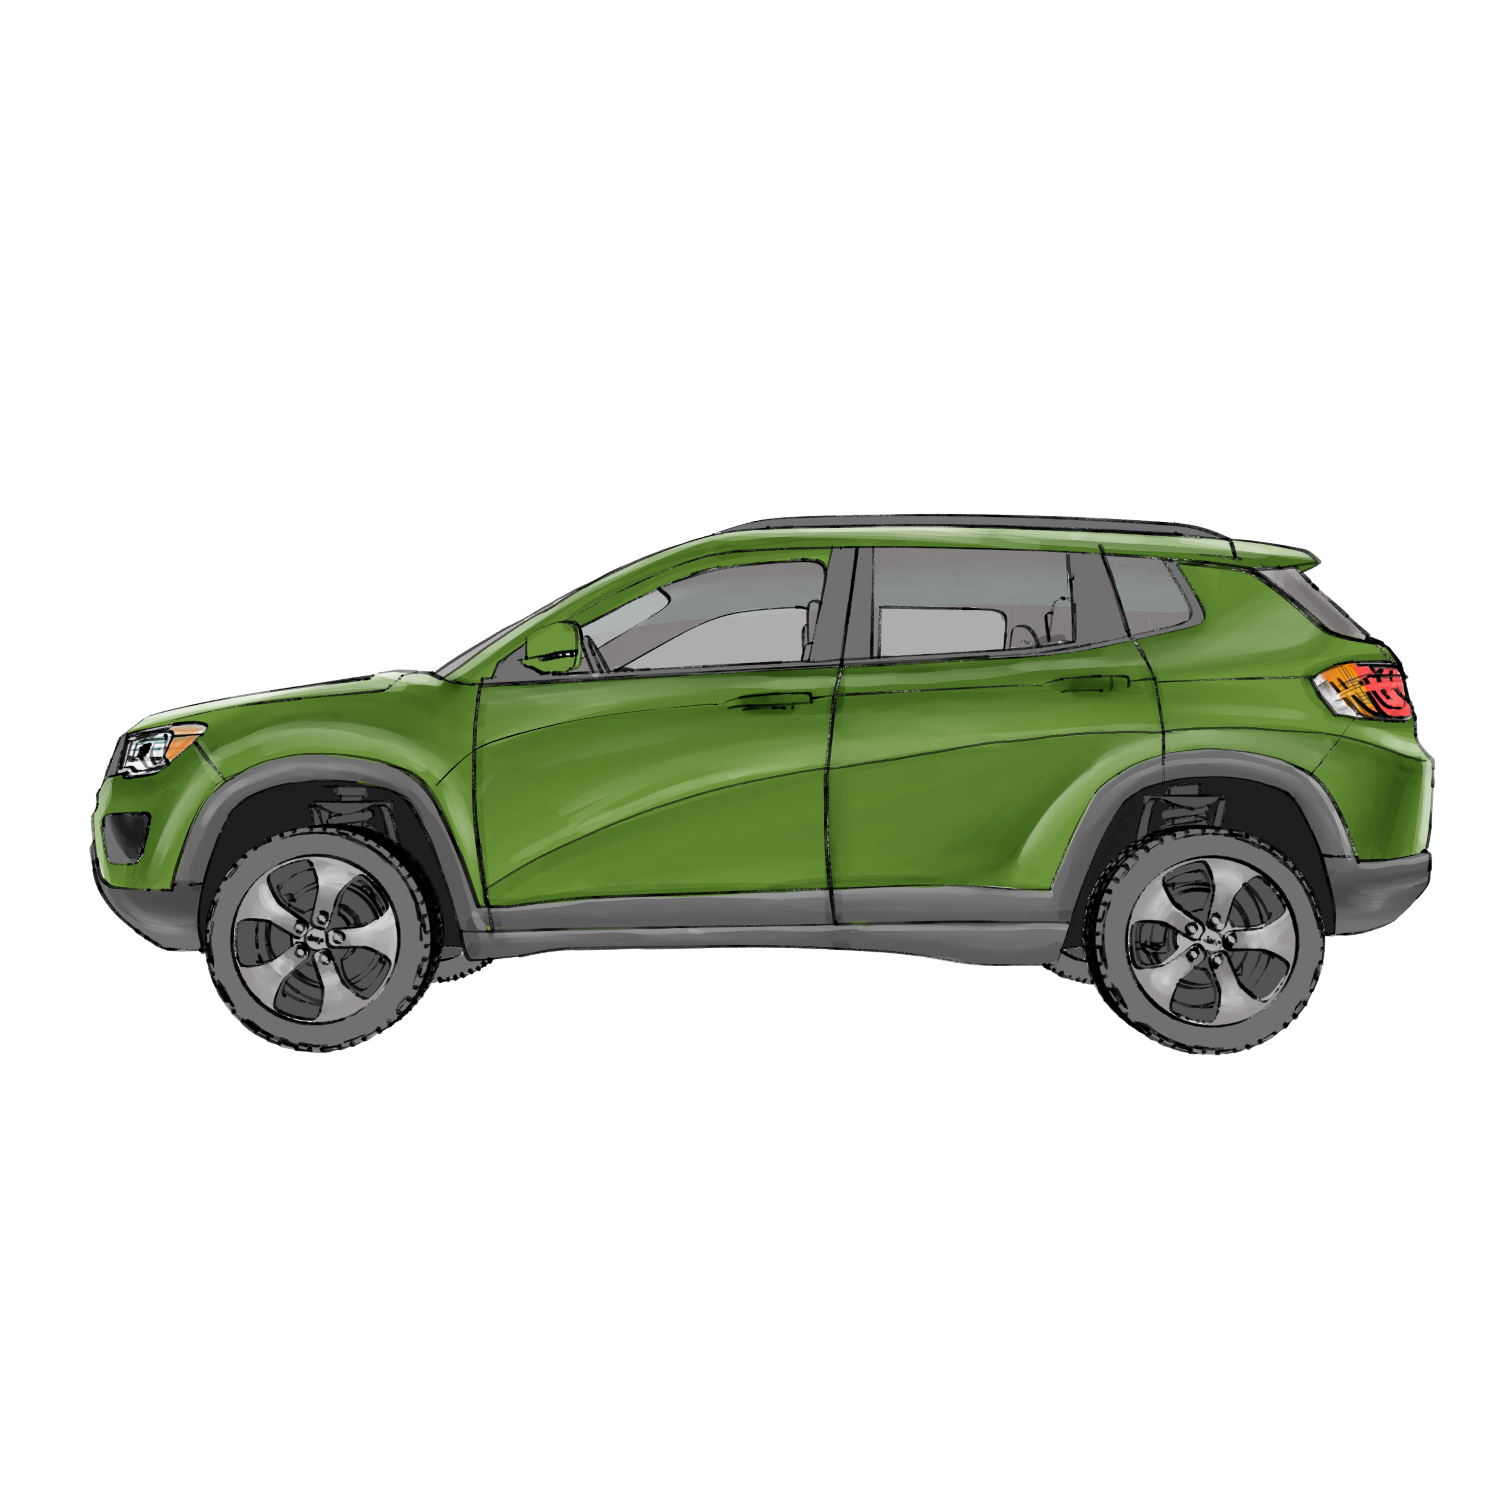  Product image 2 of the product “OX5 Family SUV ”